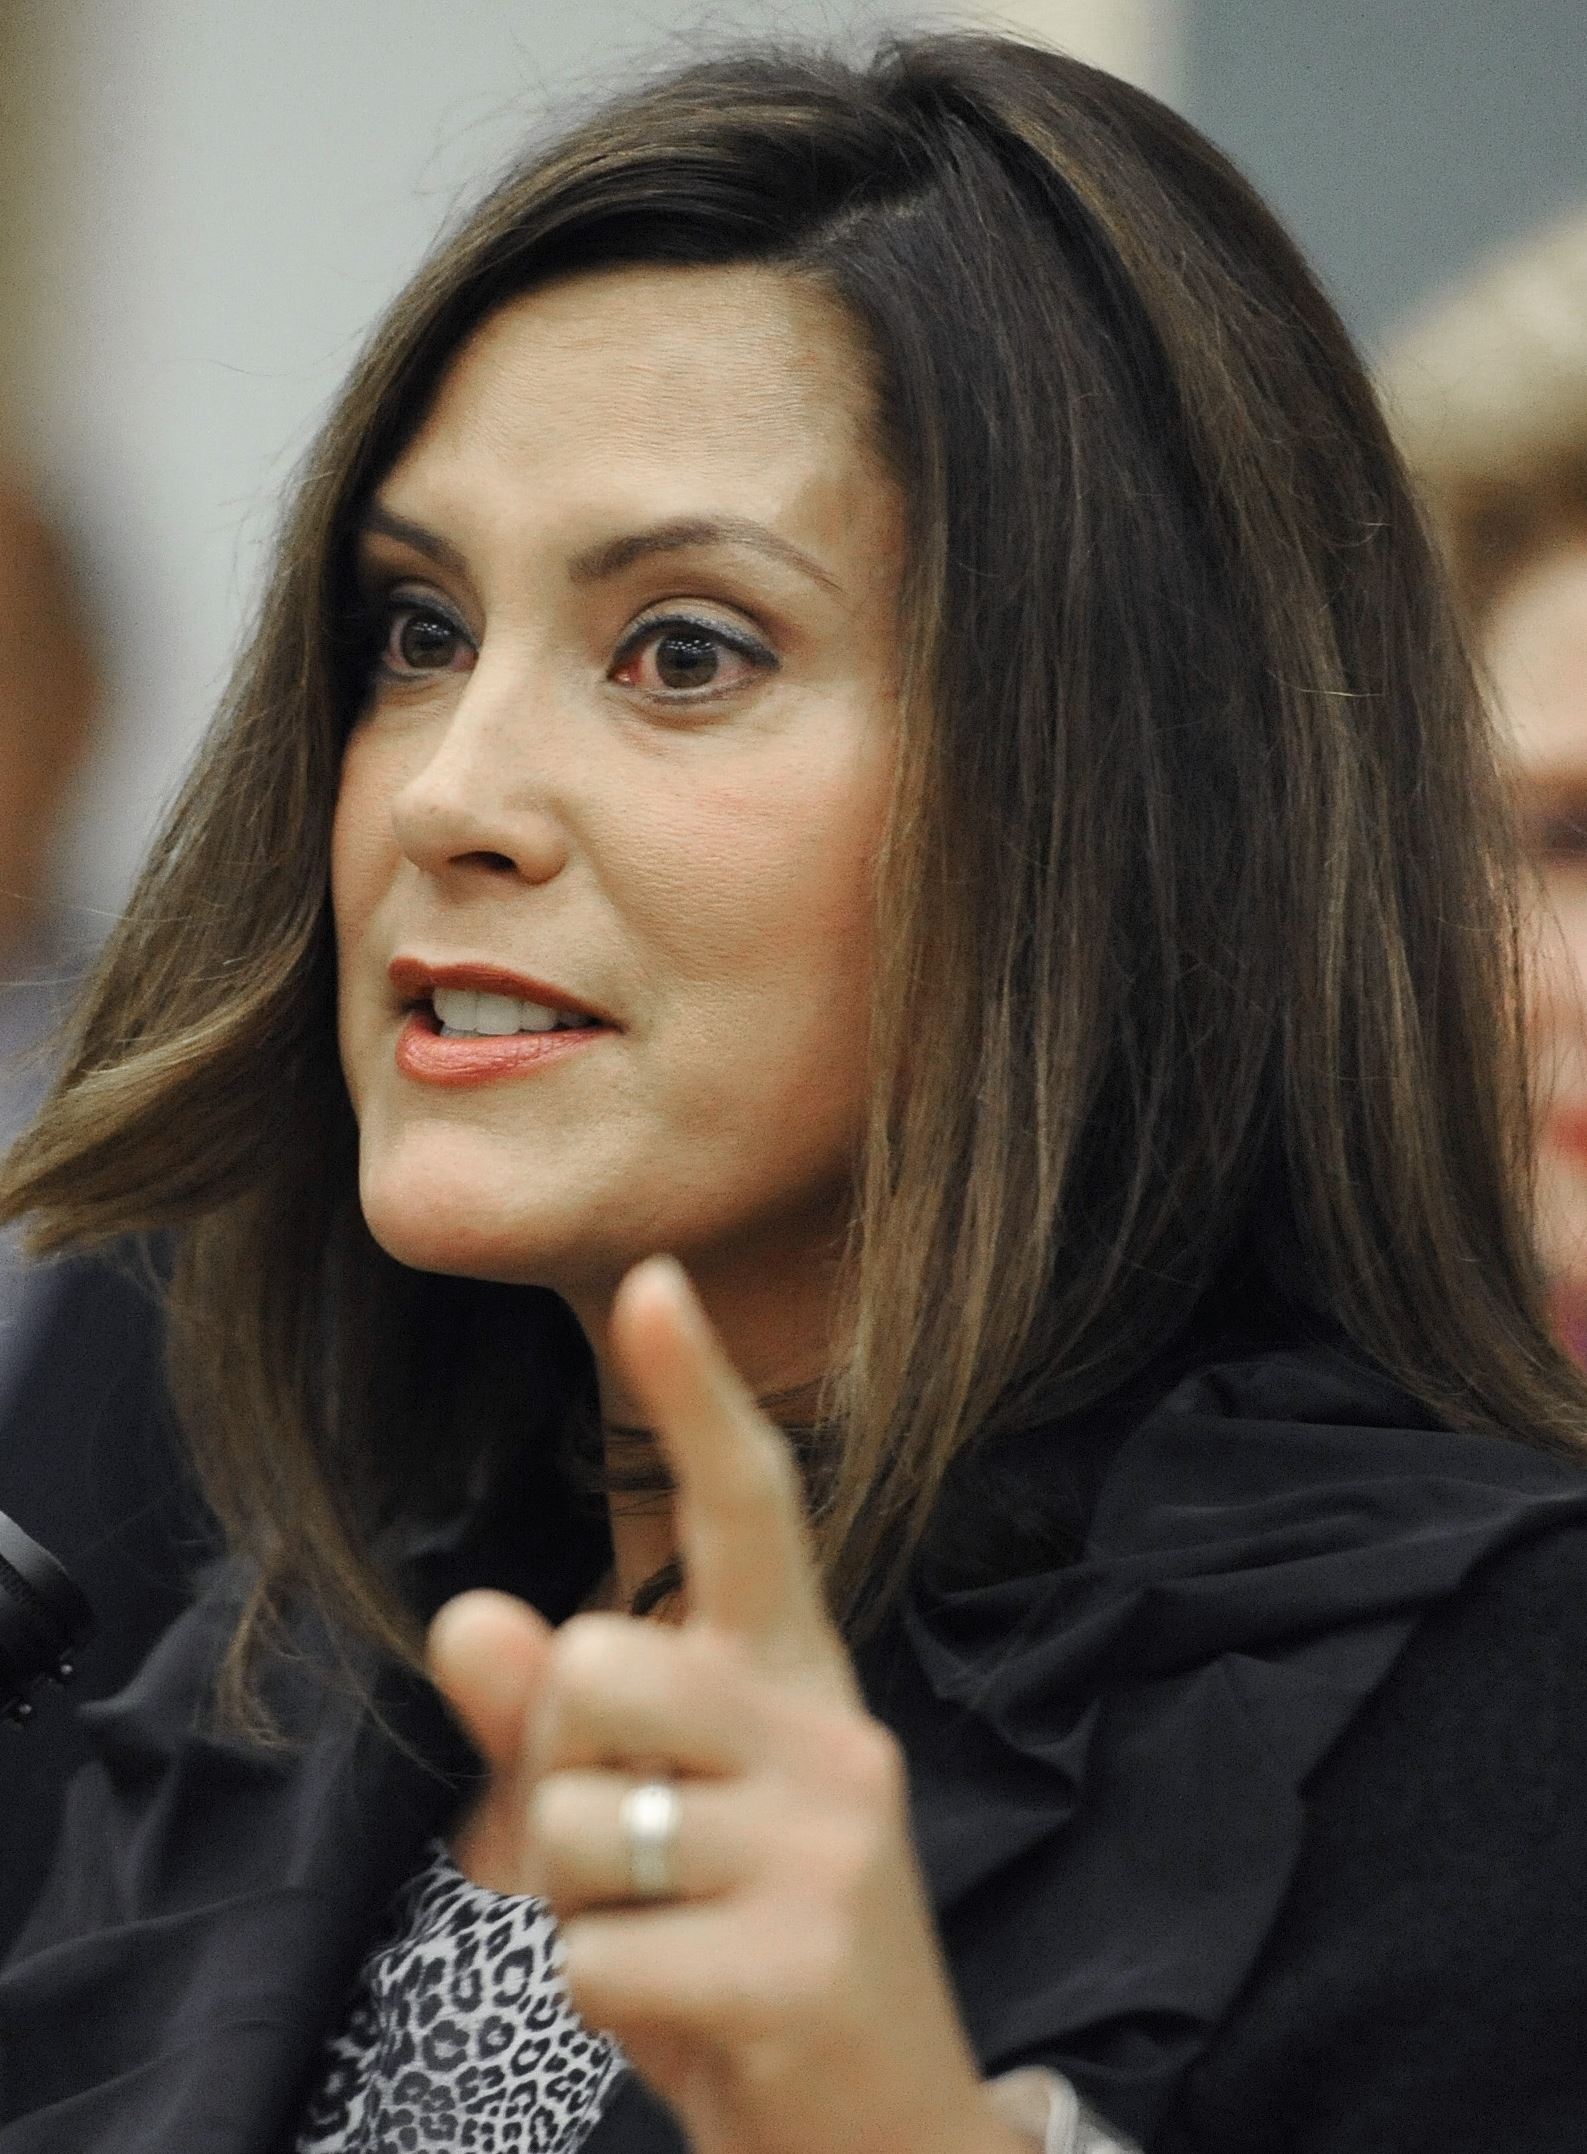 Whitmer files to run for Michigan governor in 2018 - The Blade1587 x 2154